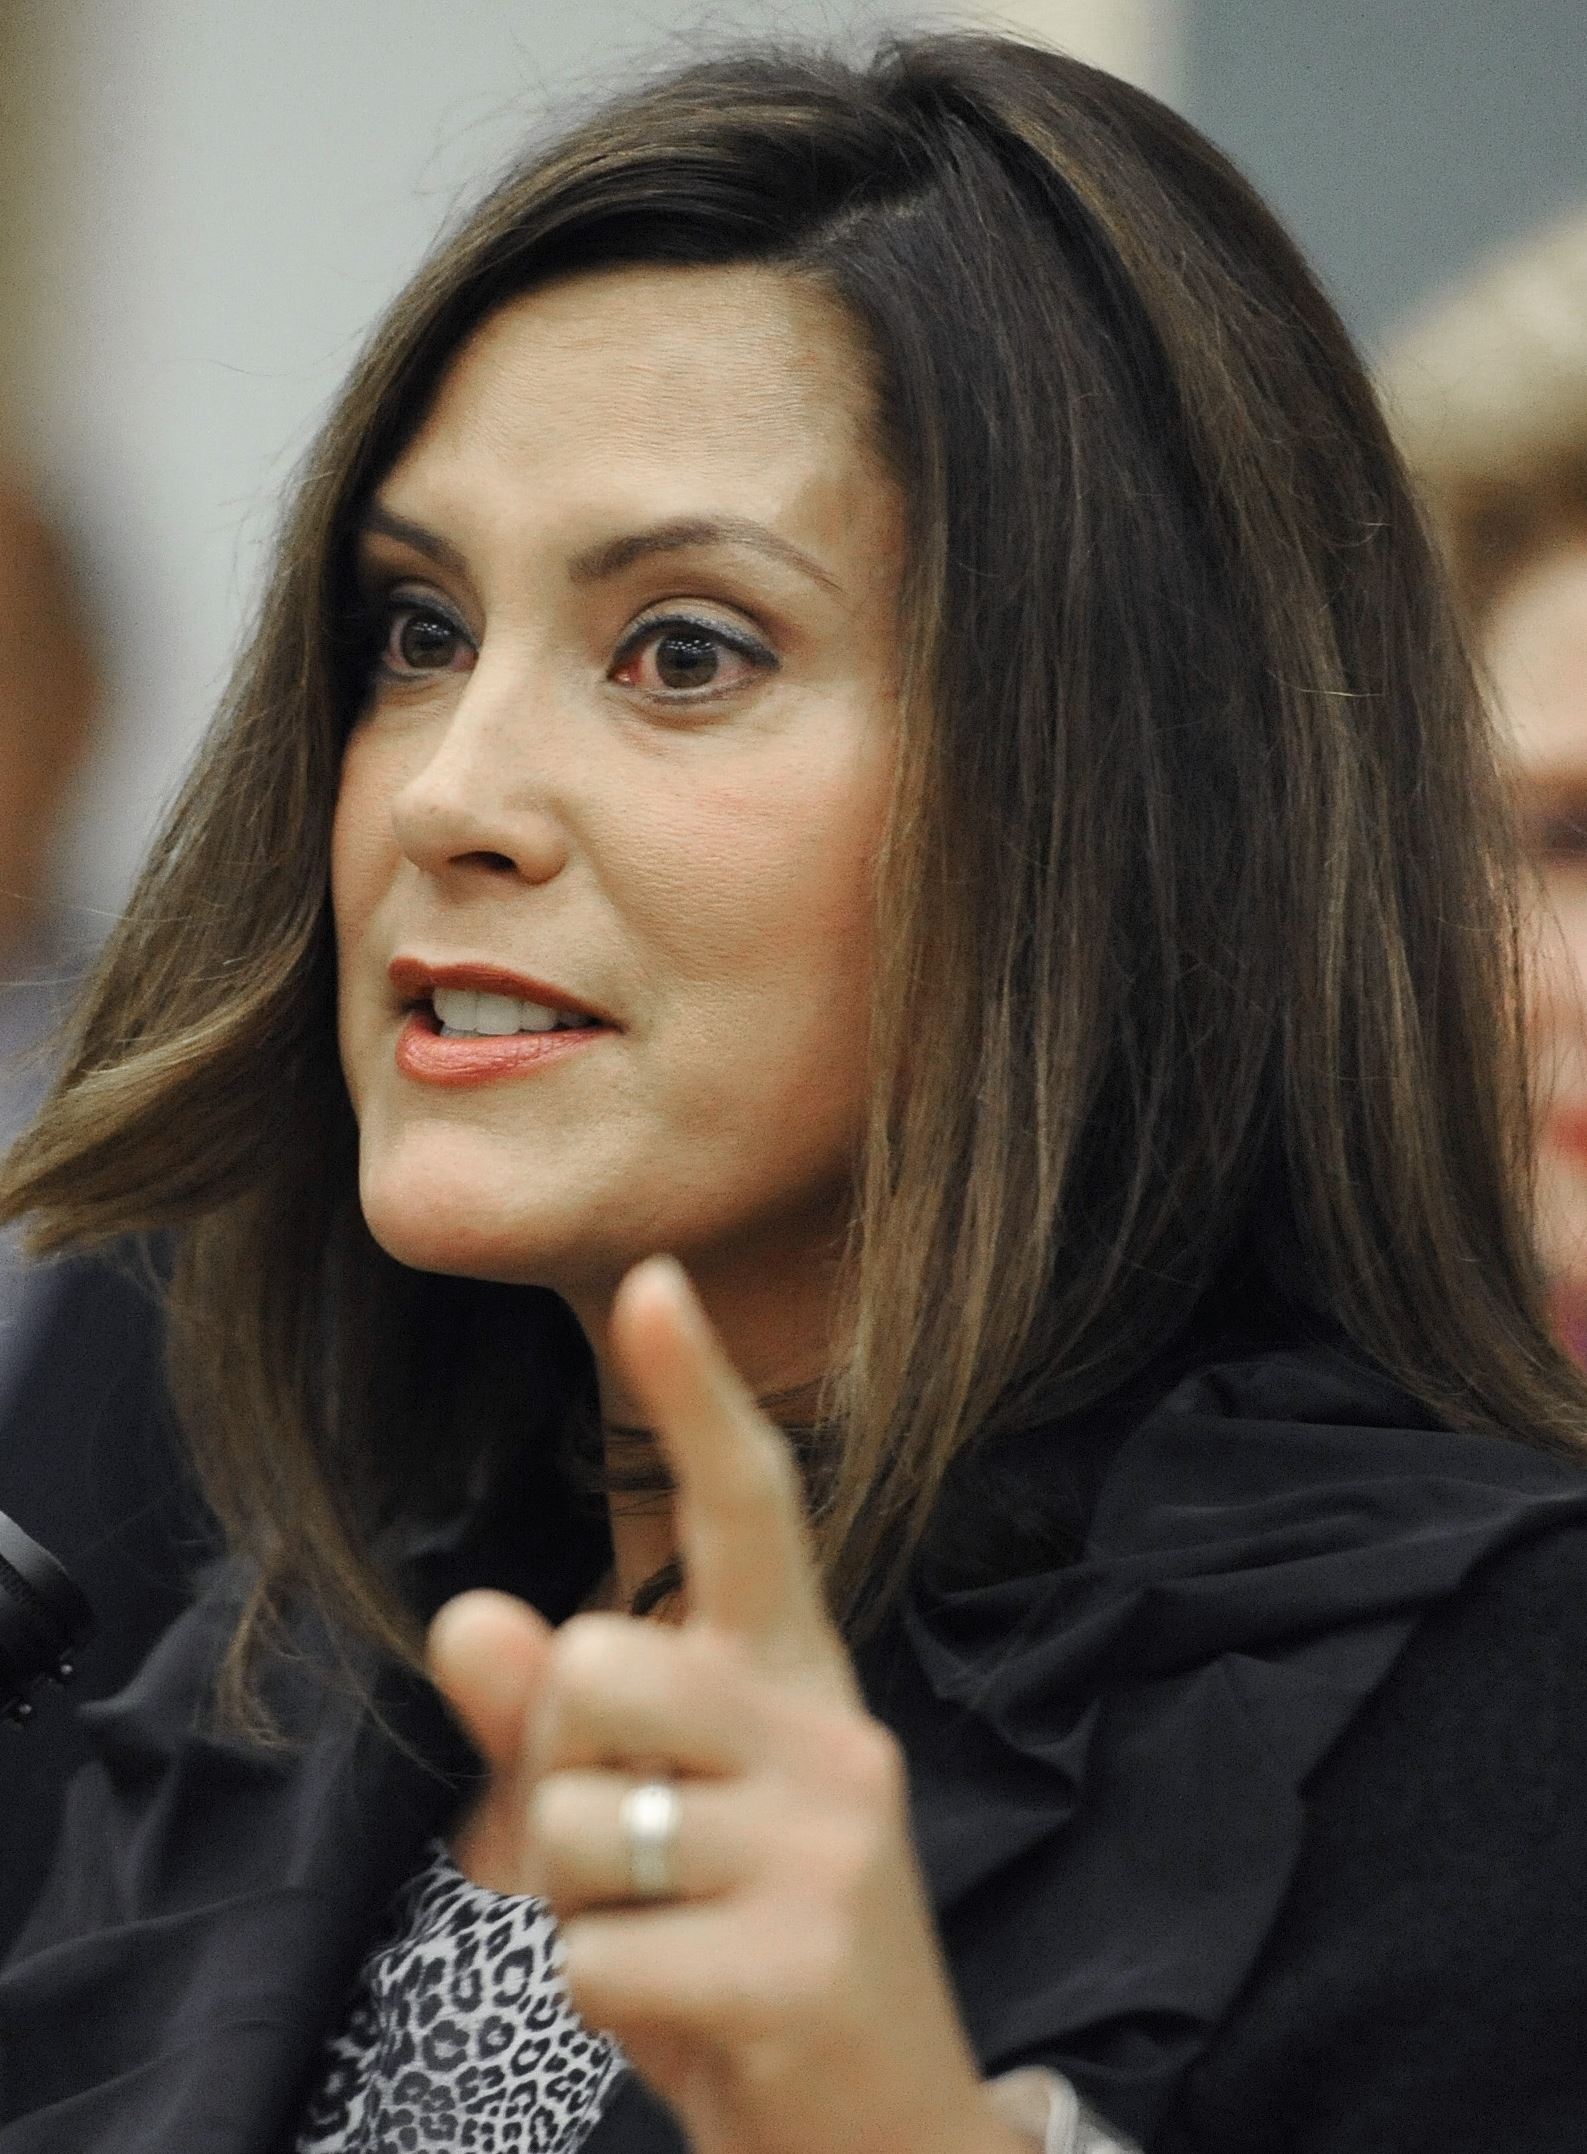 Whitmer files to run for Michigan governor in 2018 - The Blade1587 x 2154